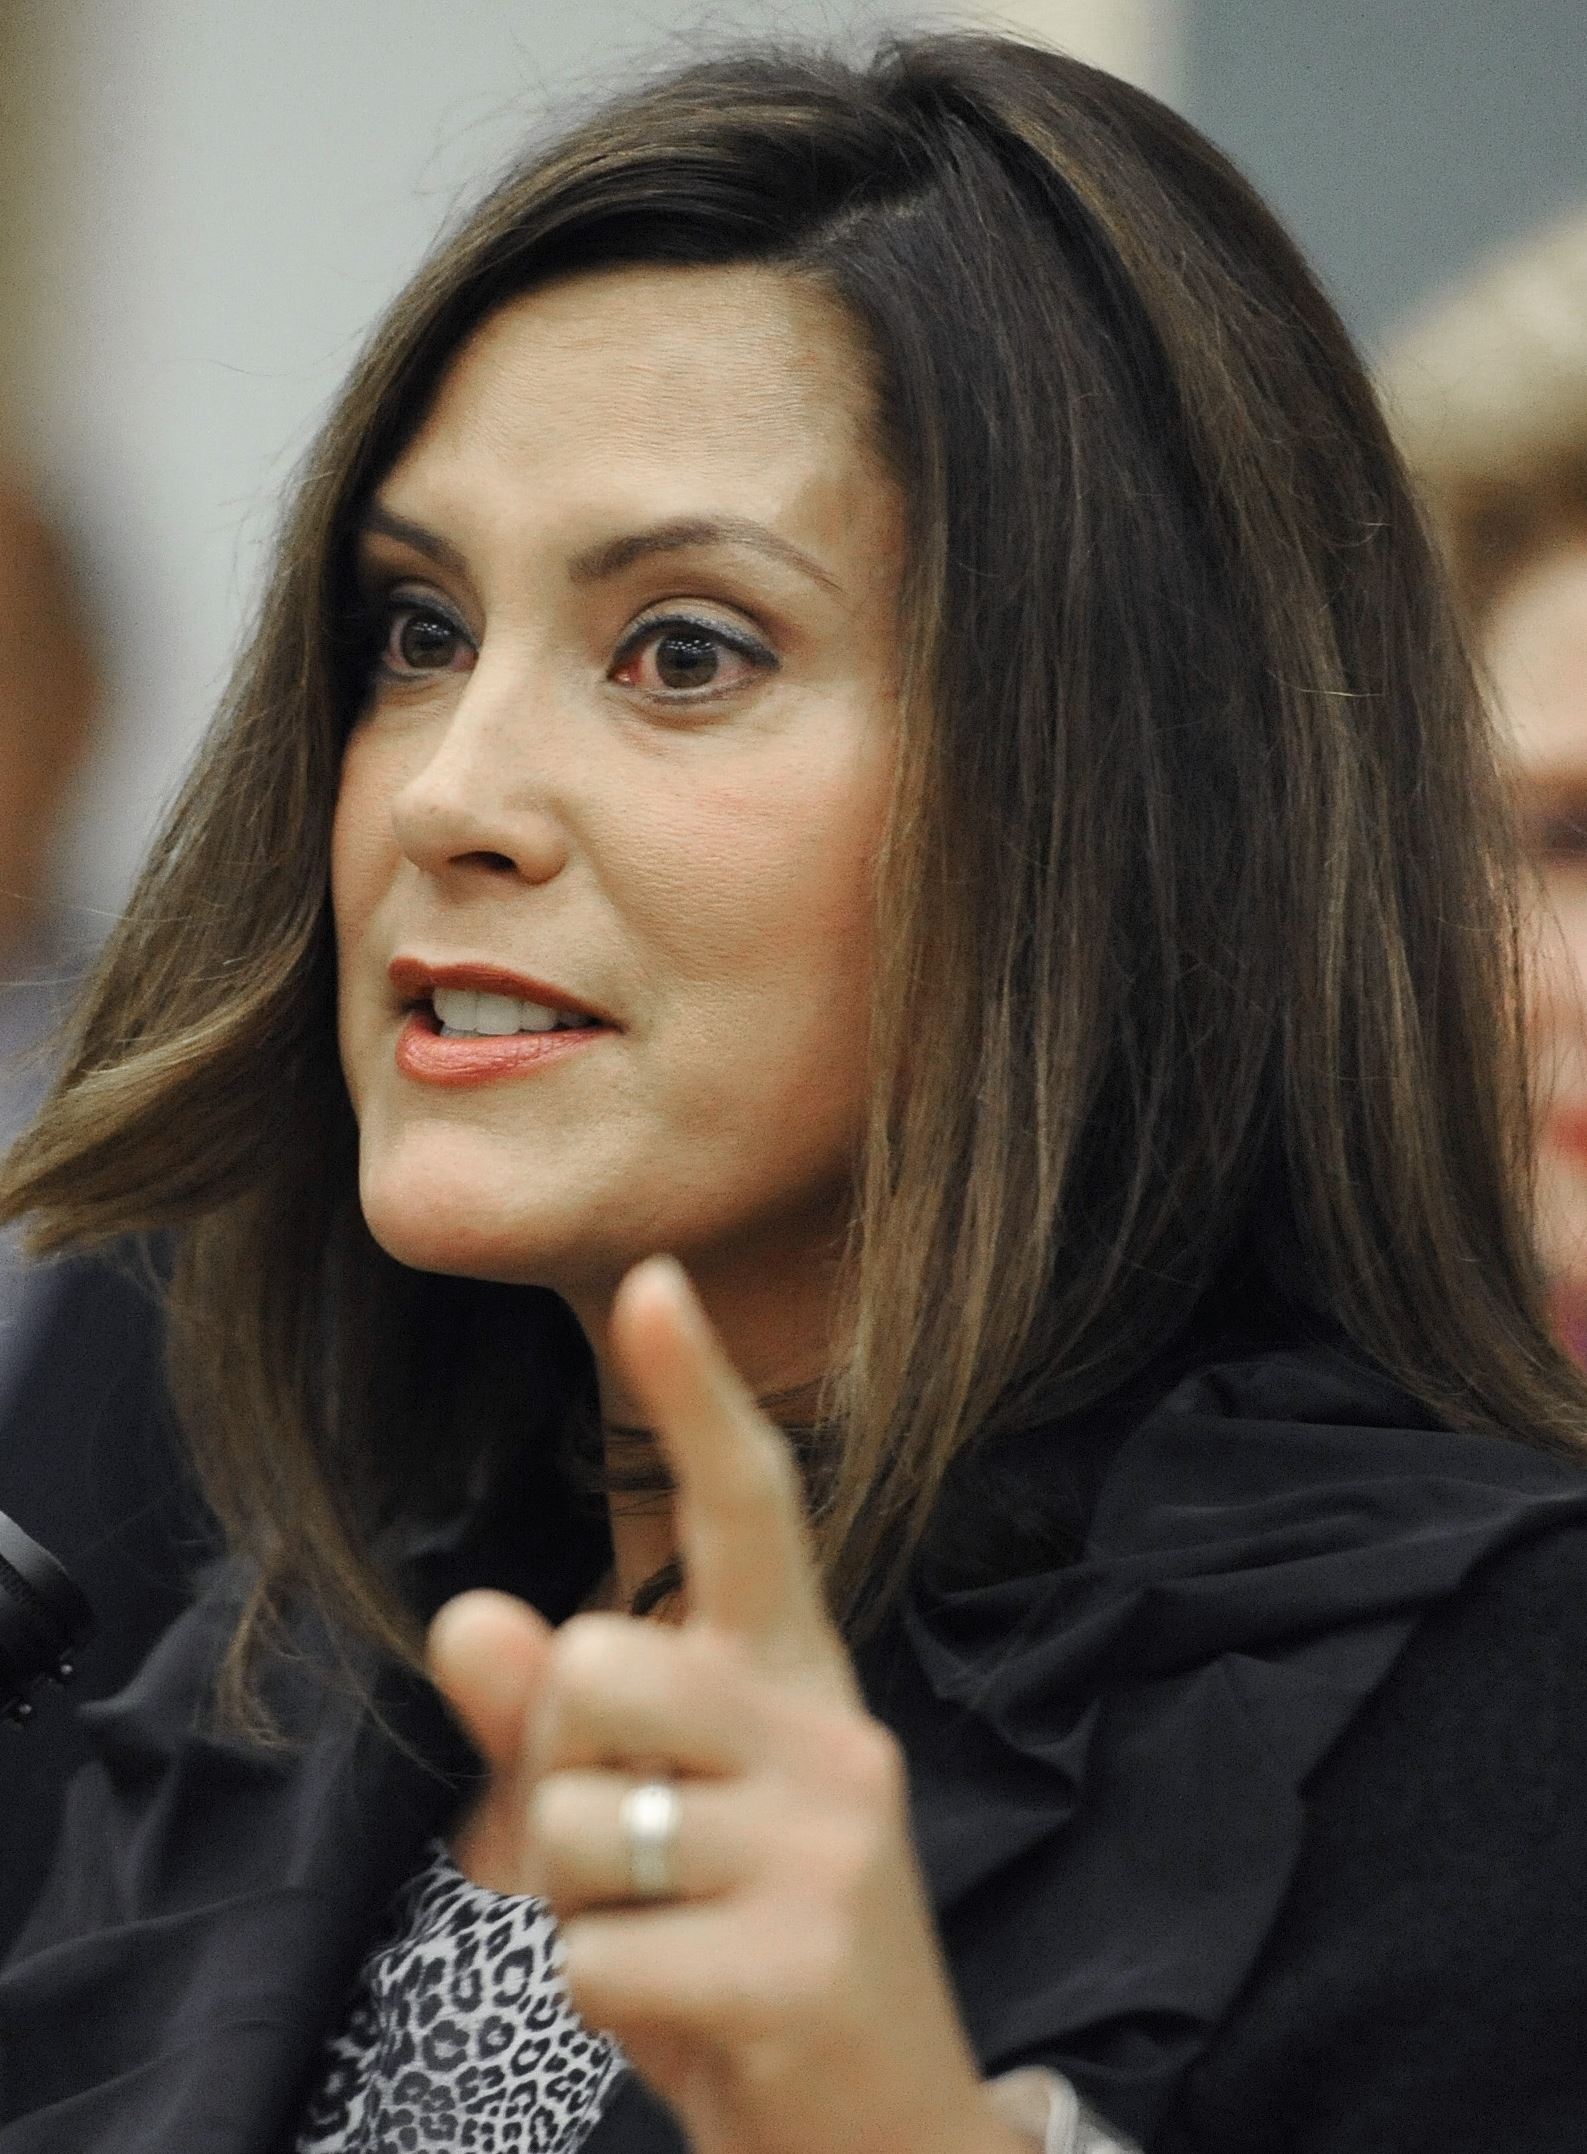 Whitmer files to run for Michigan governor in 2018 - The Blade1587 x 2154